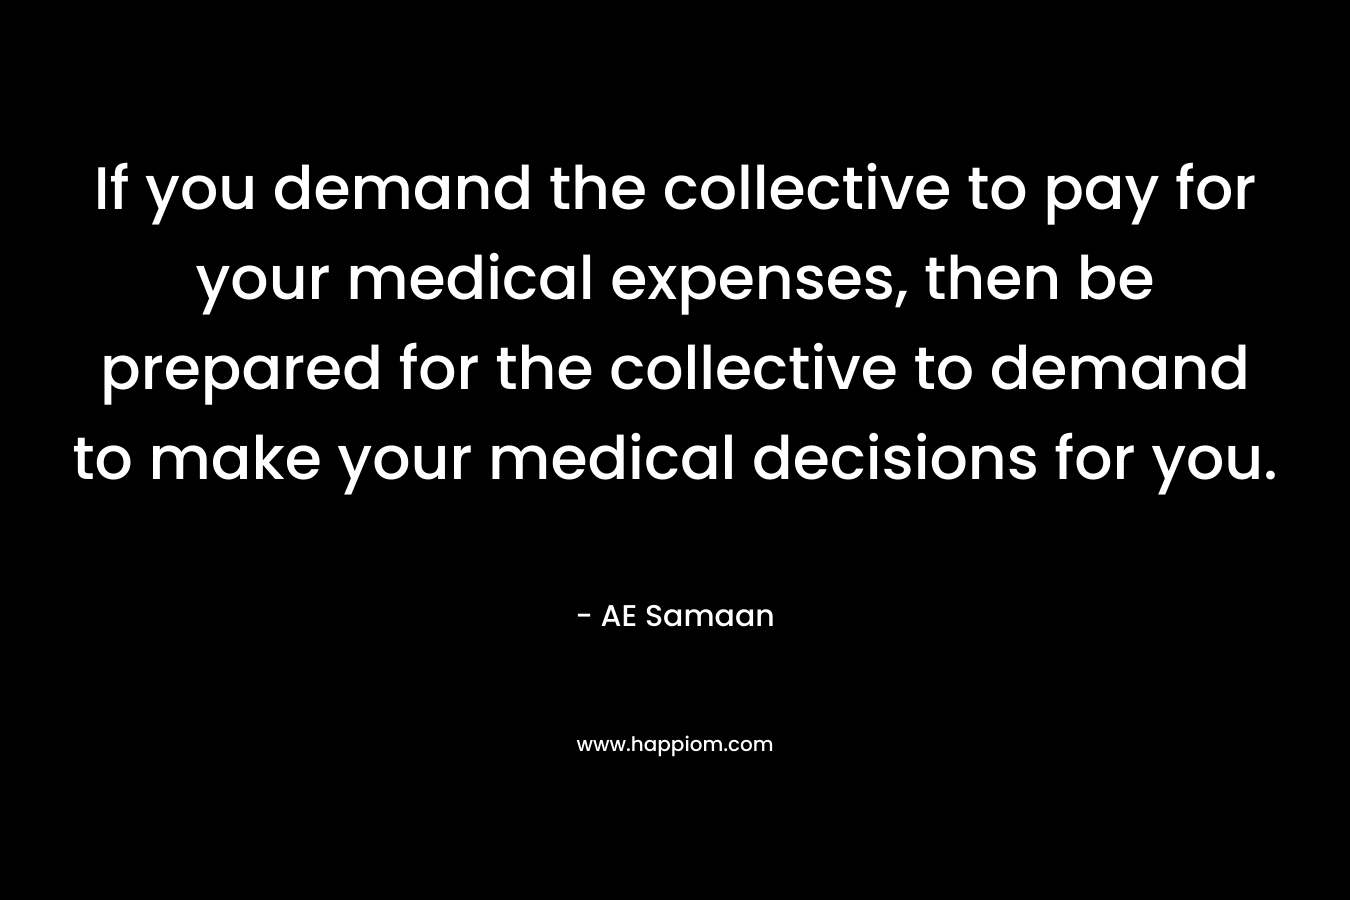 If you demand the collective to pay for your medical expenses, then be prepared for the collective to demand to make your medical decisions for you.